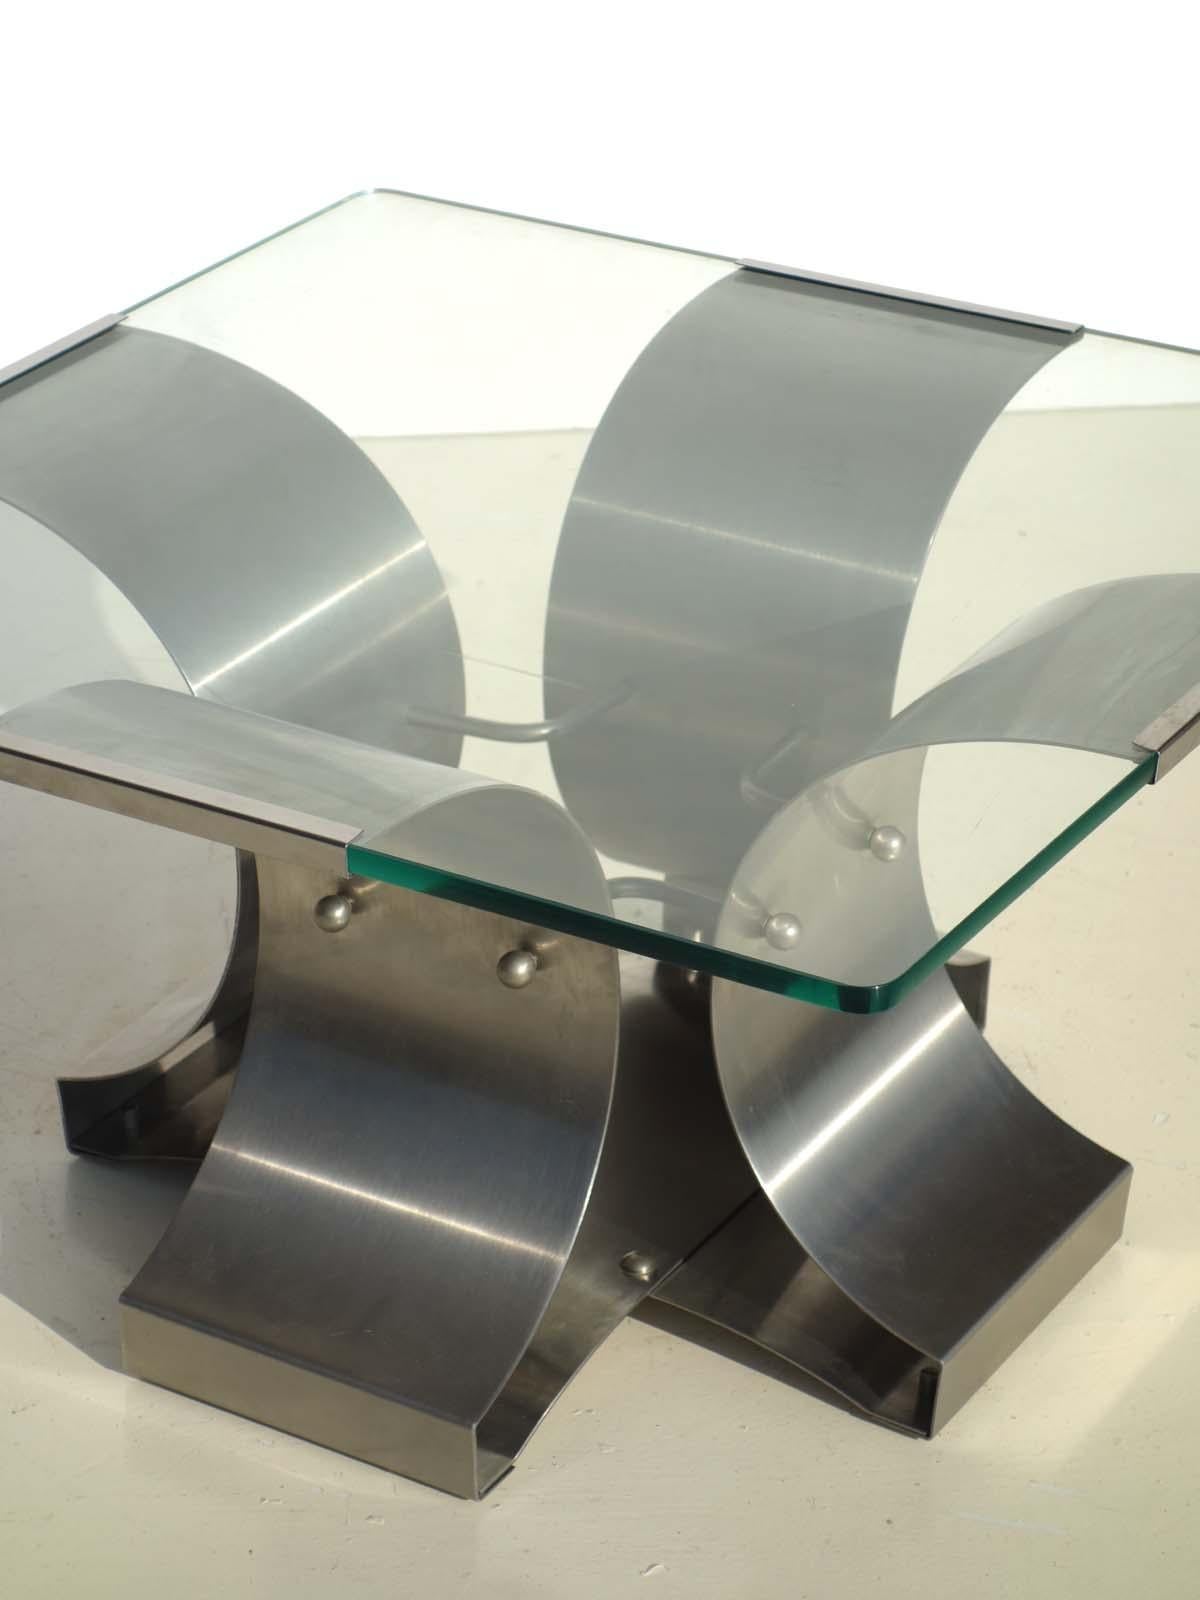 Coffee table designed by Francois Monnet, France, 1970s. 
The brushed stainless steel frame is topped with a glass top, which is surrounded and edged with metal clips.